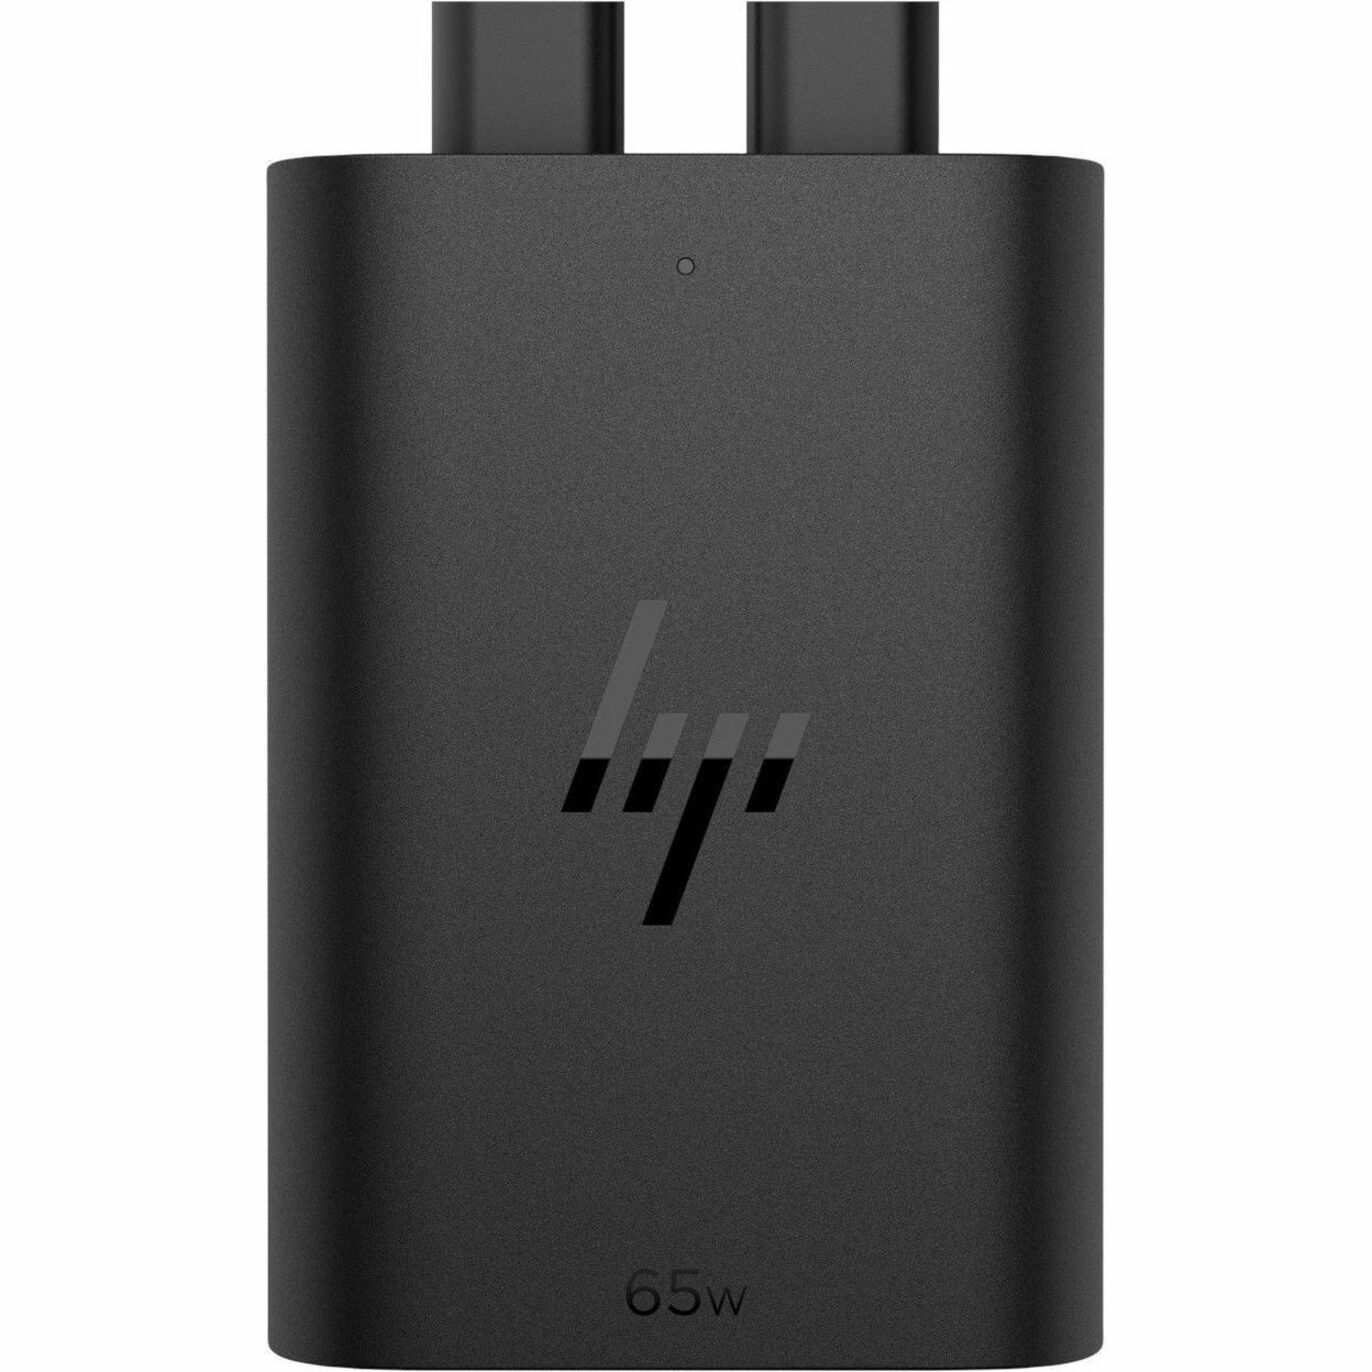 HP 65W GaN USB-C Laptop Charger, Fast Charging for USB Type C Devices